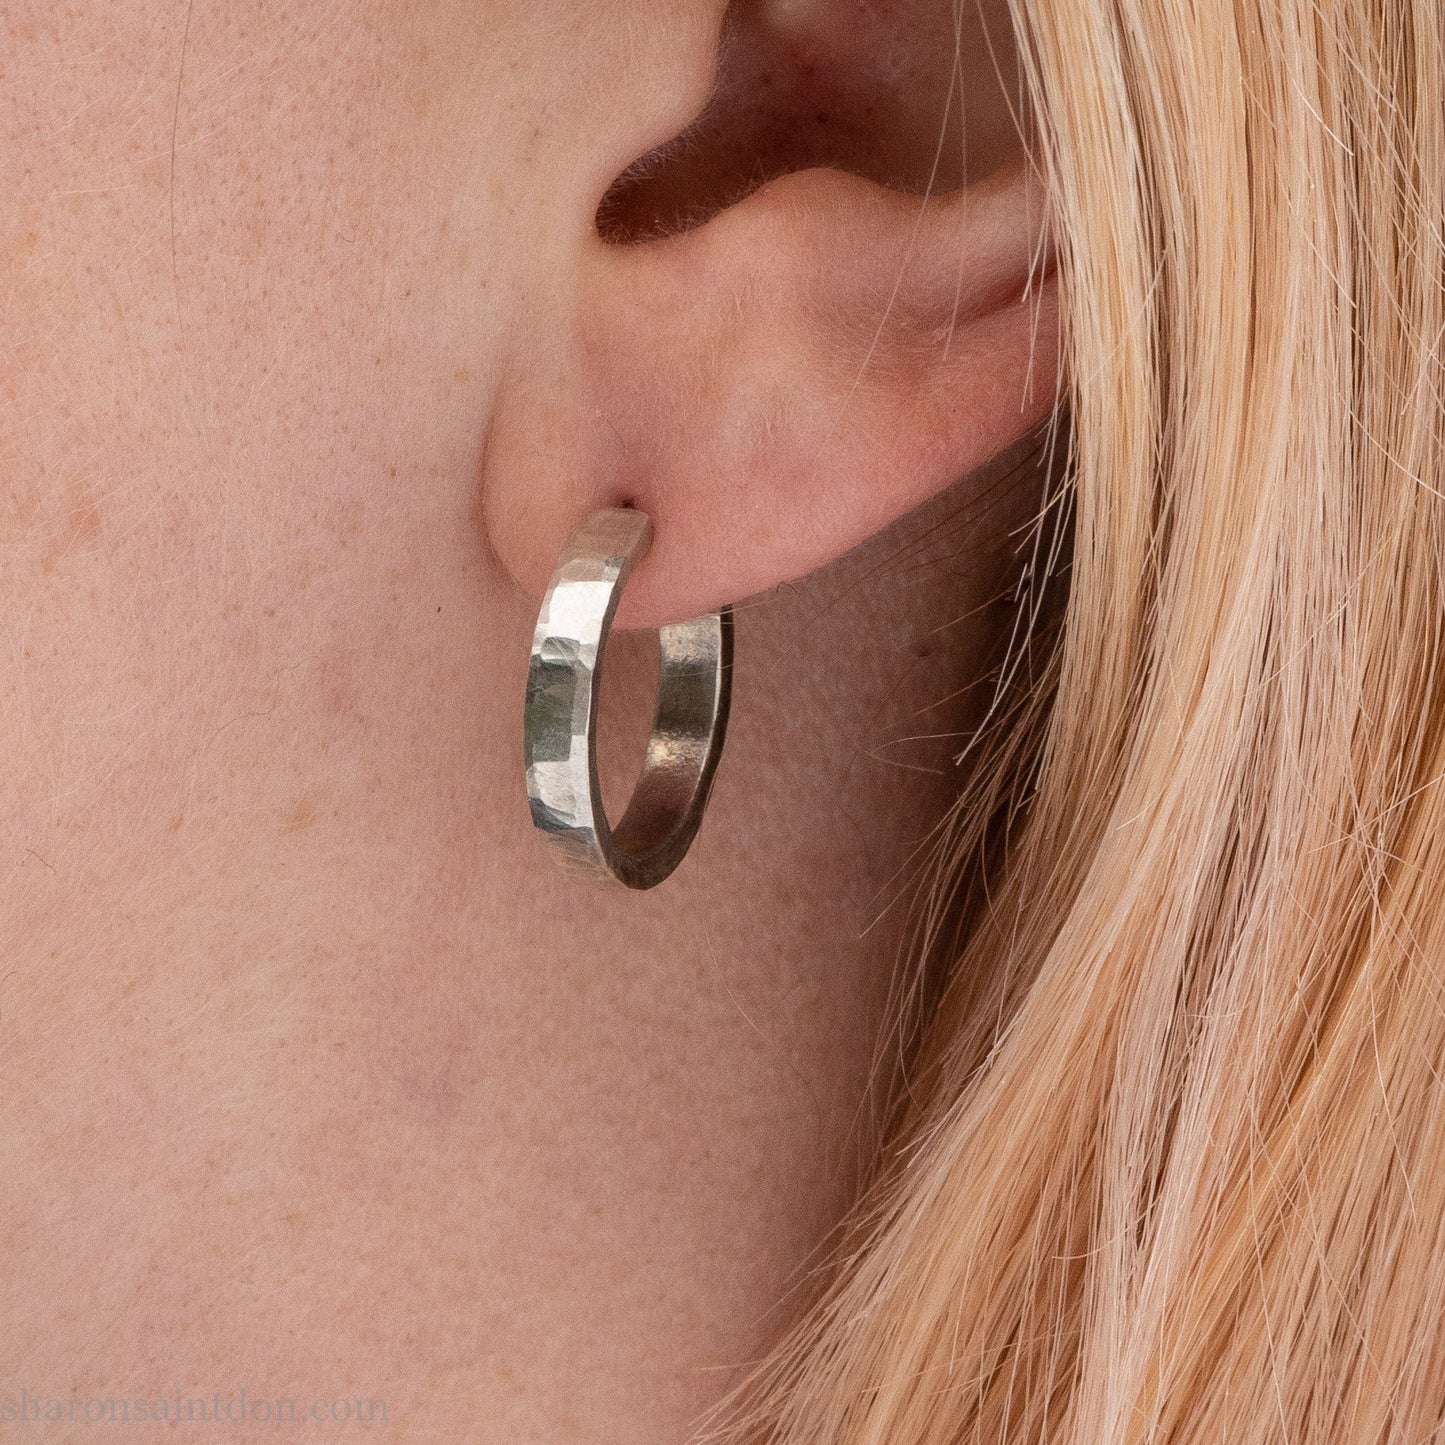 925 sterling silver hoop earrings handmade in North America by Sharon SaintDon. Small, round with hammered texture.